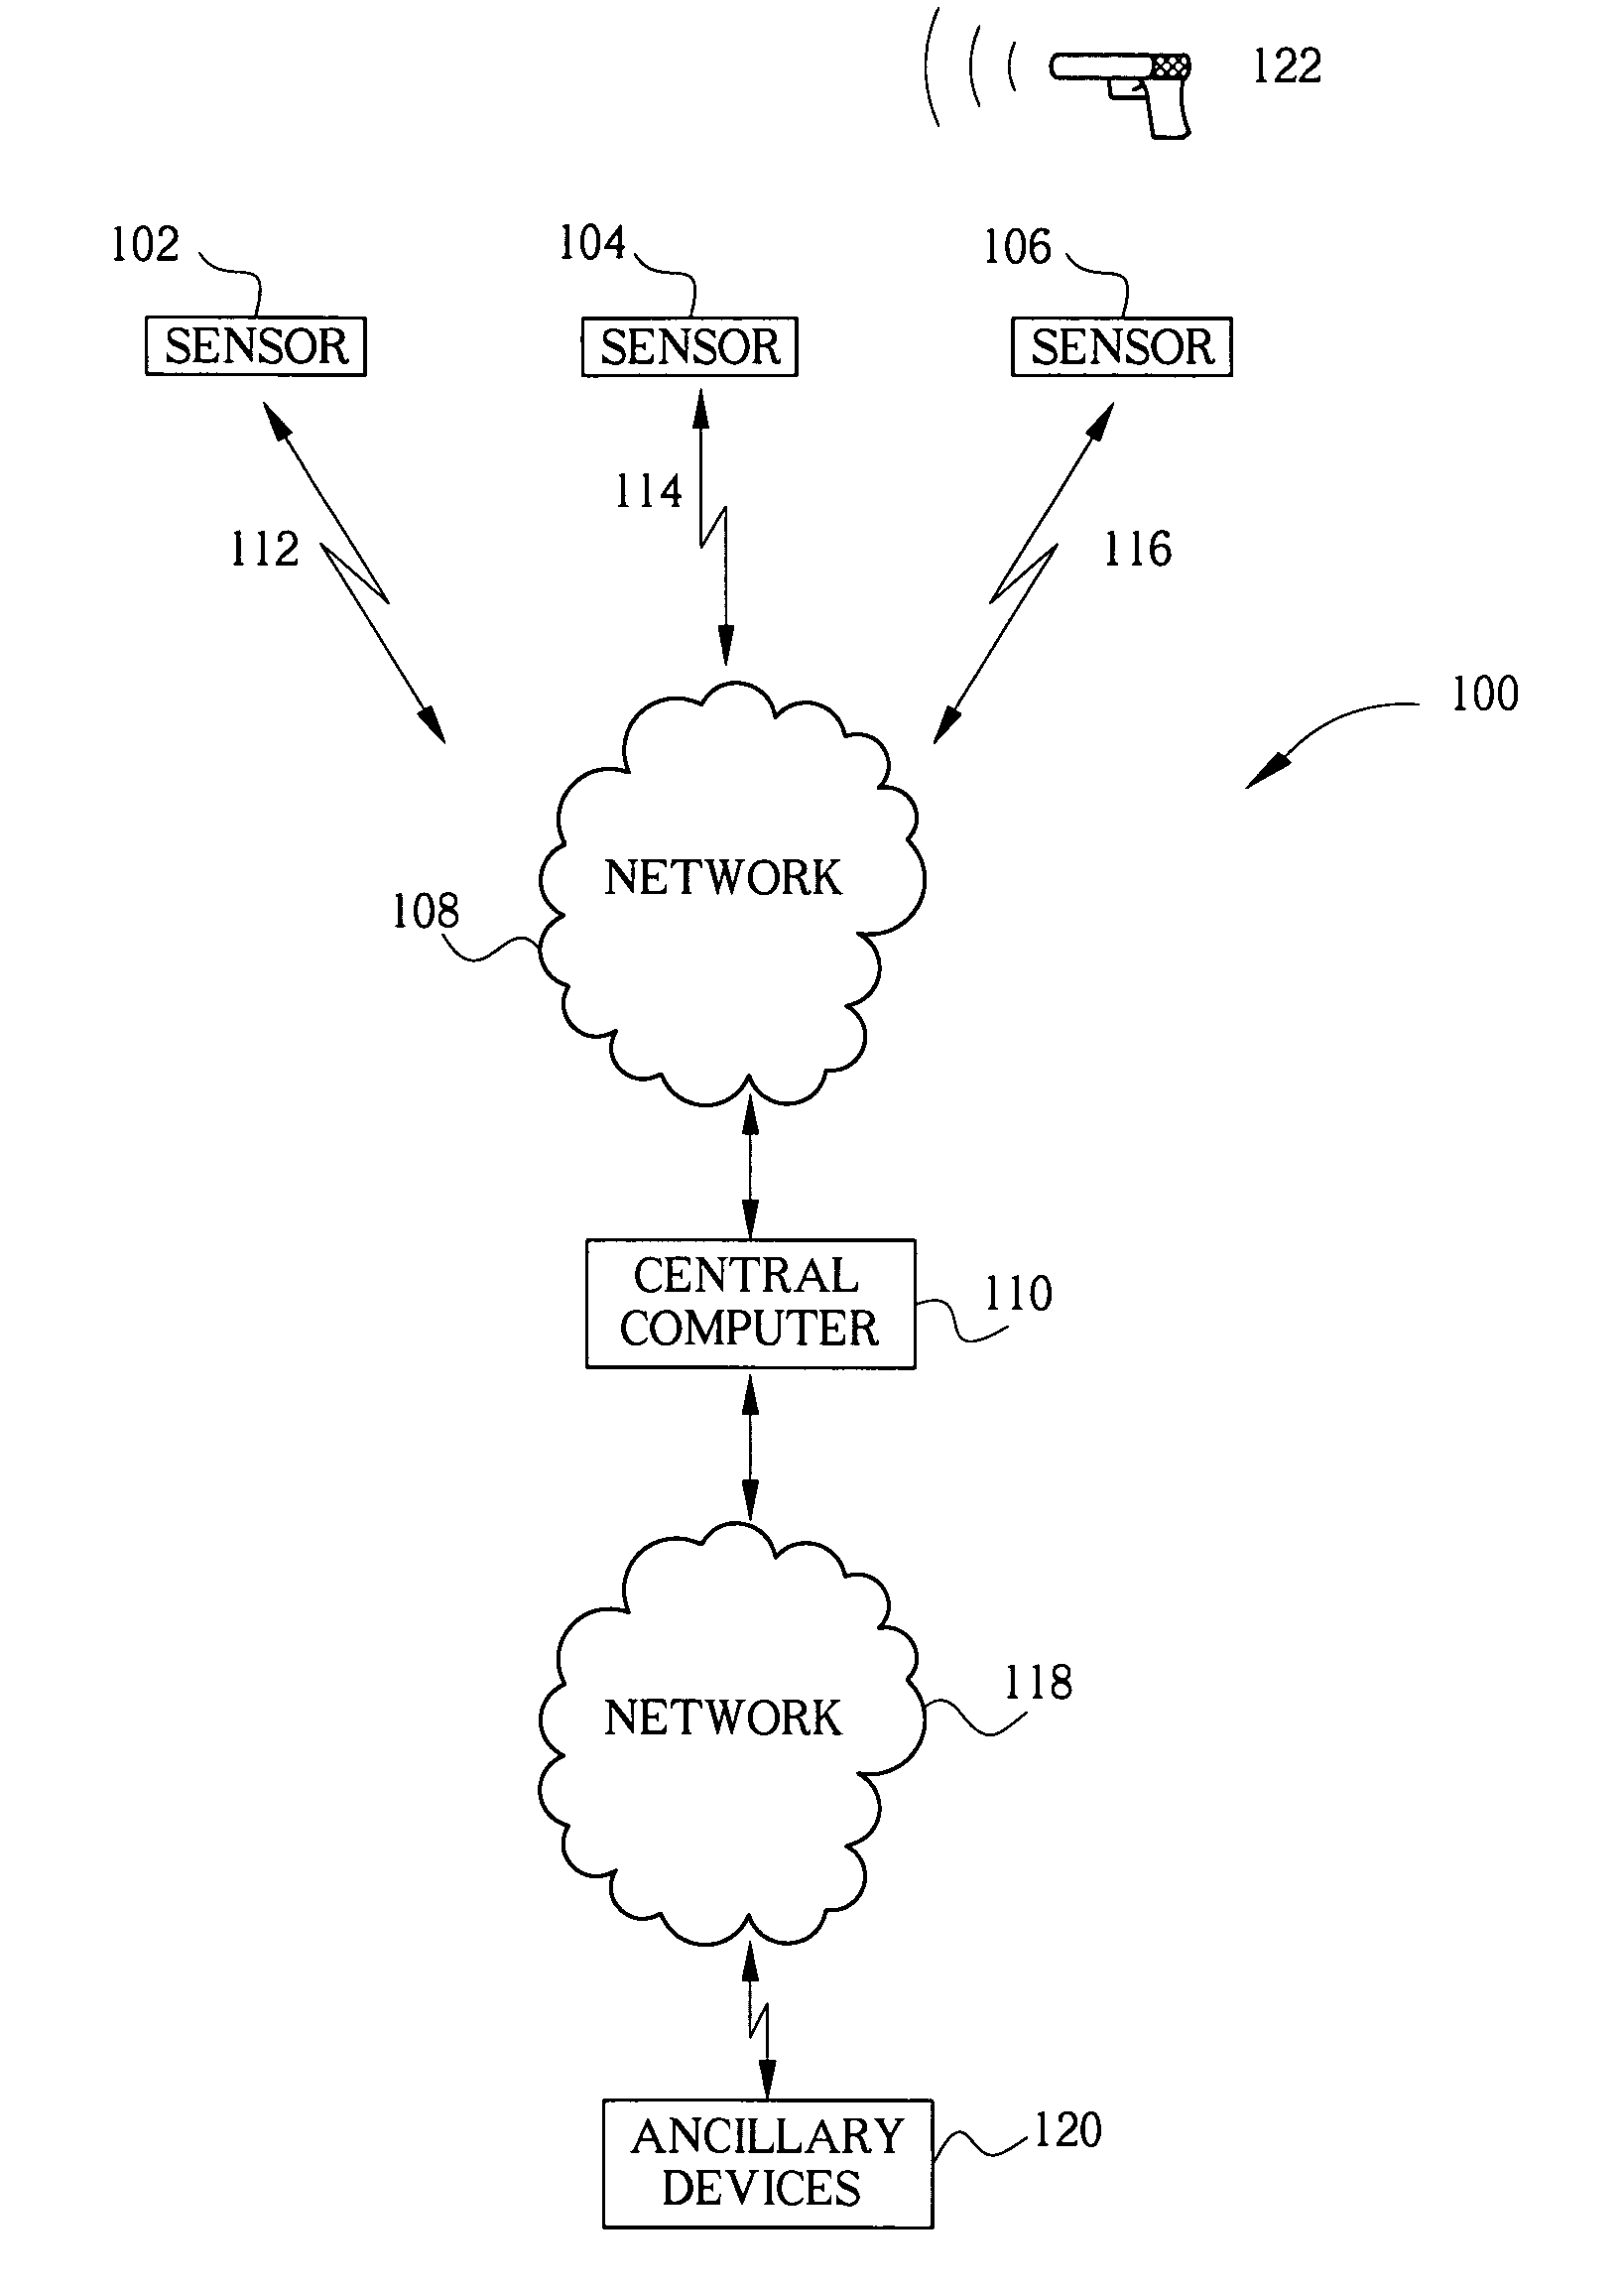 System and method for archiving data from a sensor array